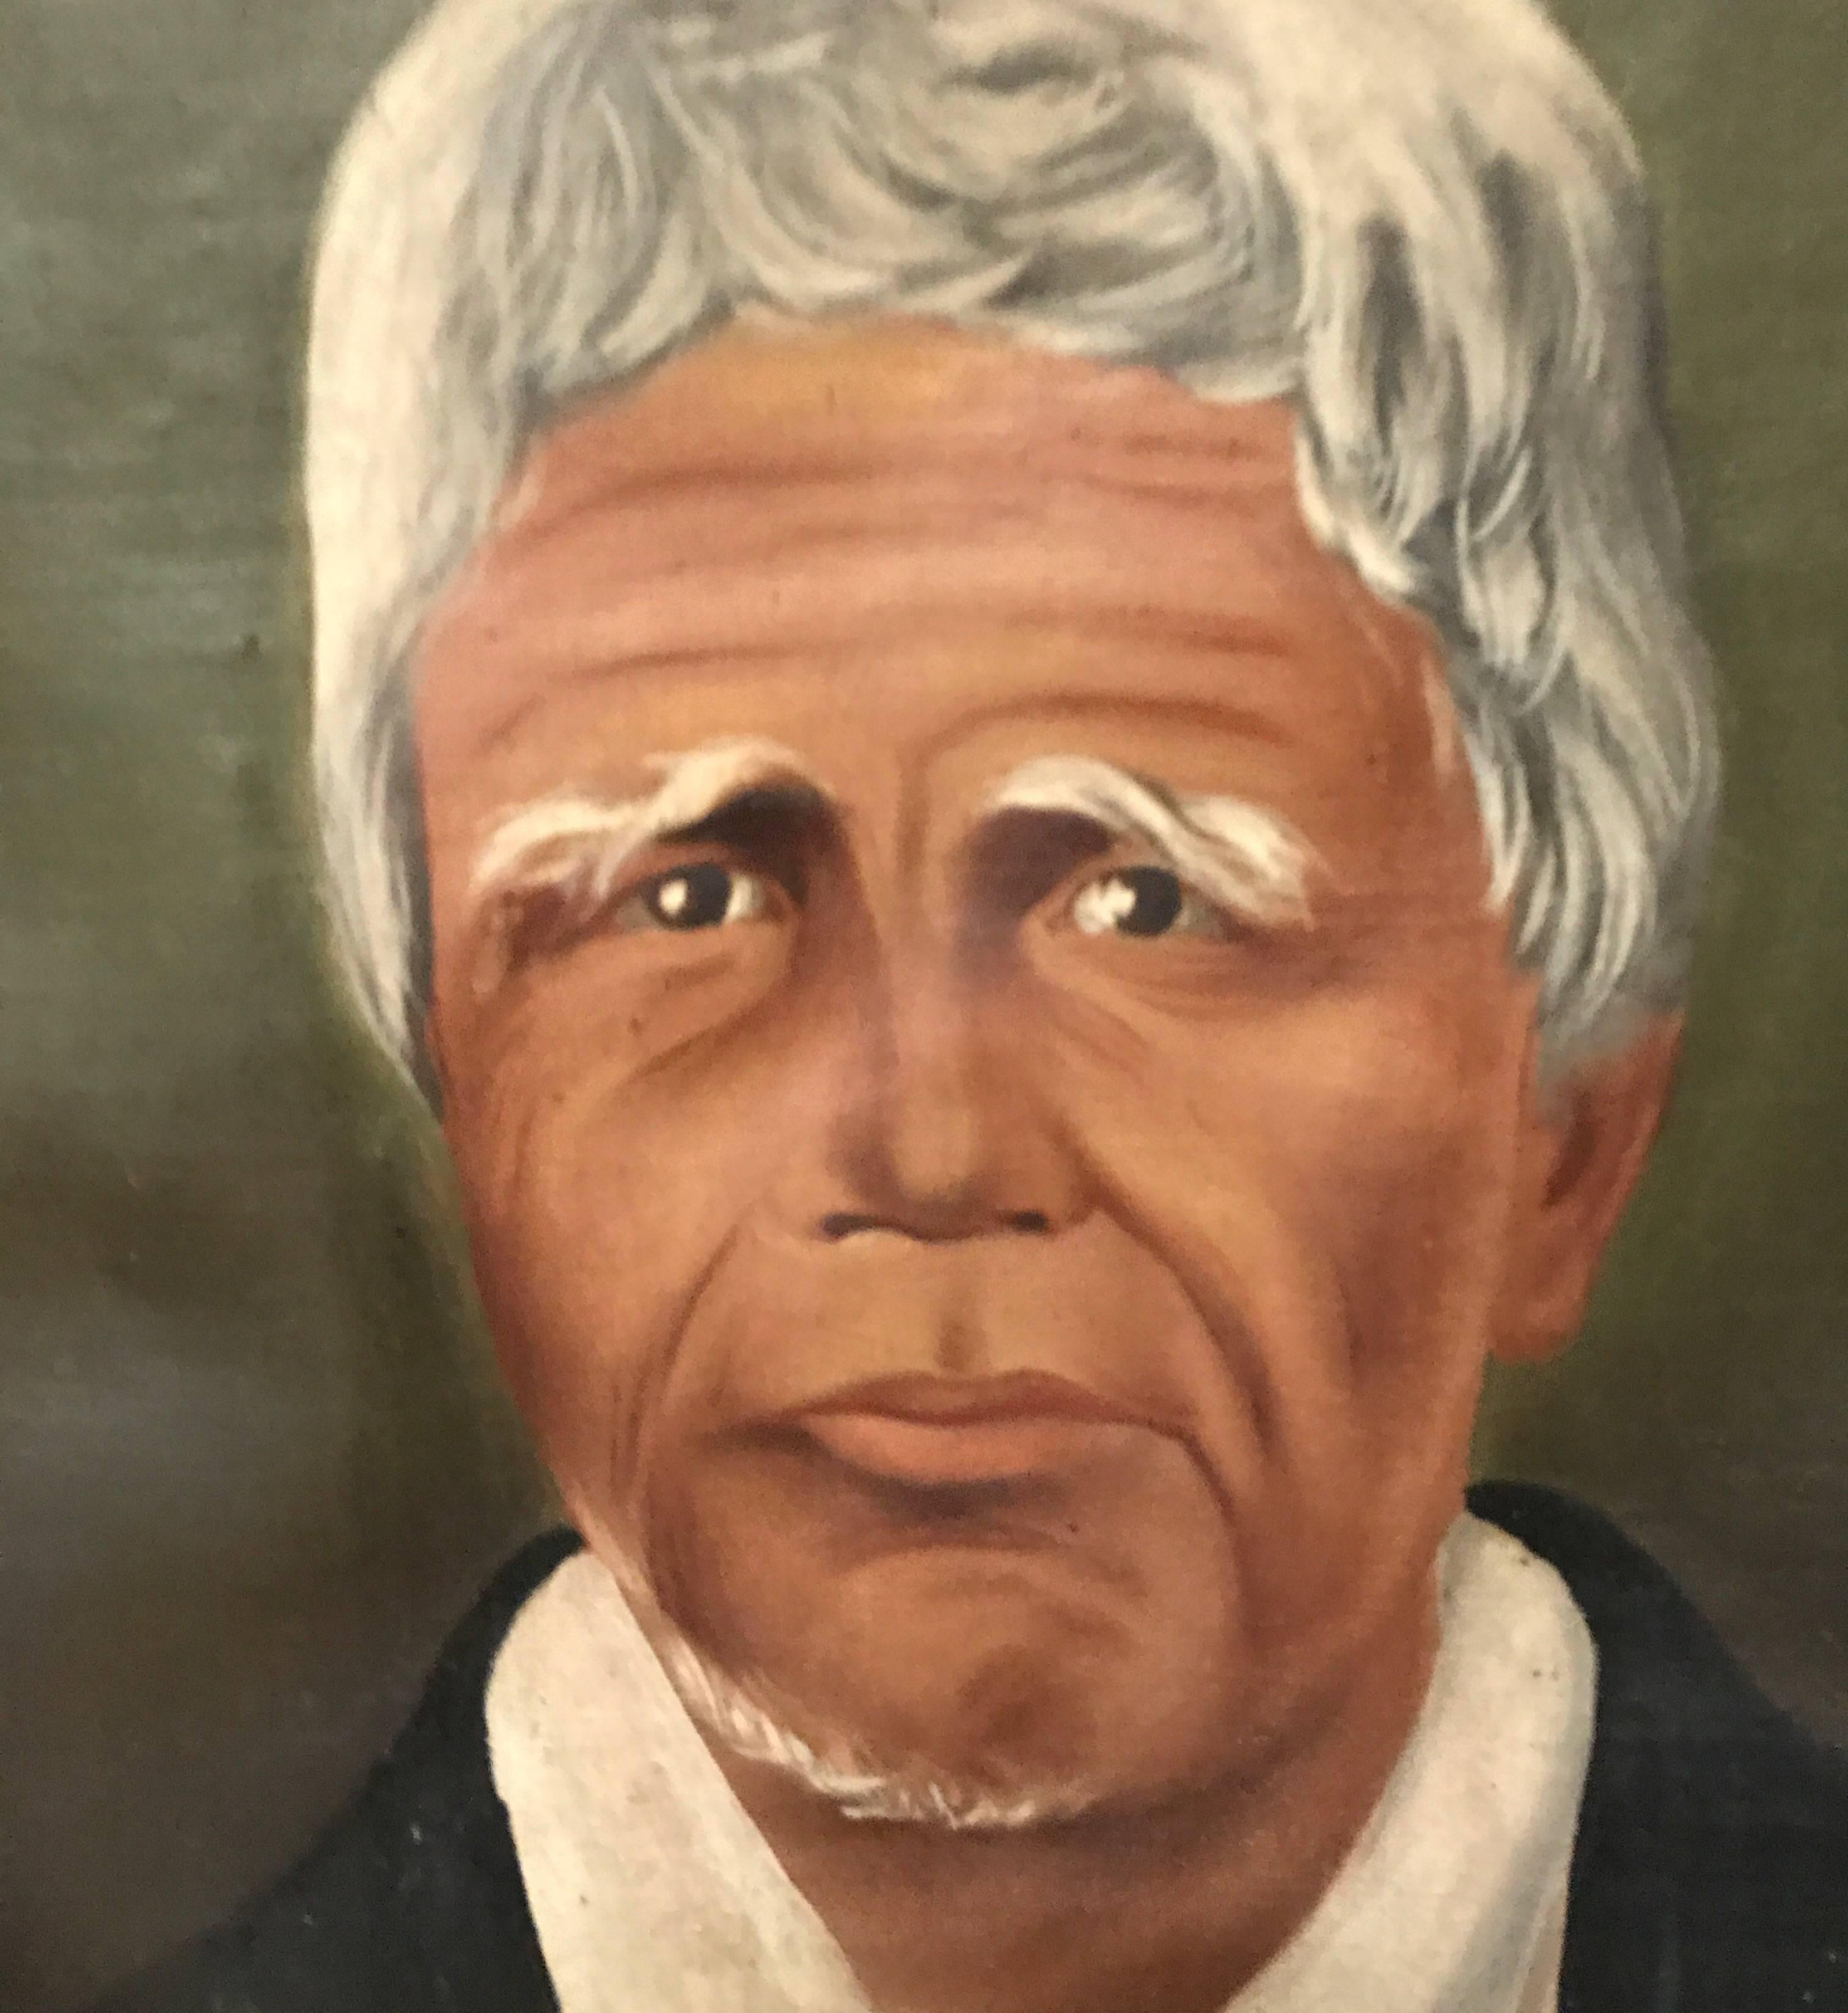 A 19th century American Primitive portrait of an elegant gentleman. The naive painting has a Folk Art quality to it.
It appears the work is in its original 19th century gilt frame.